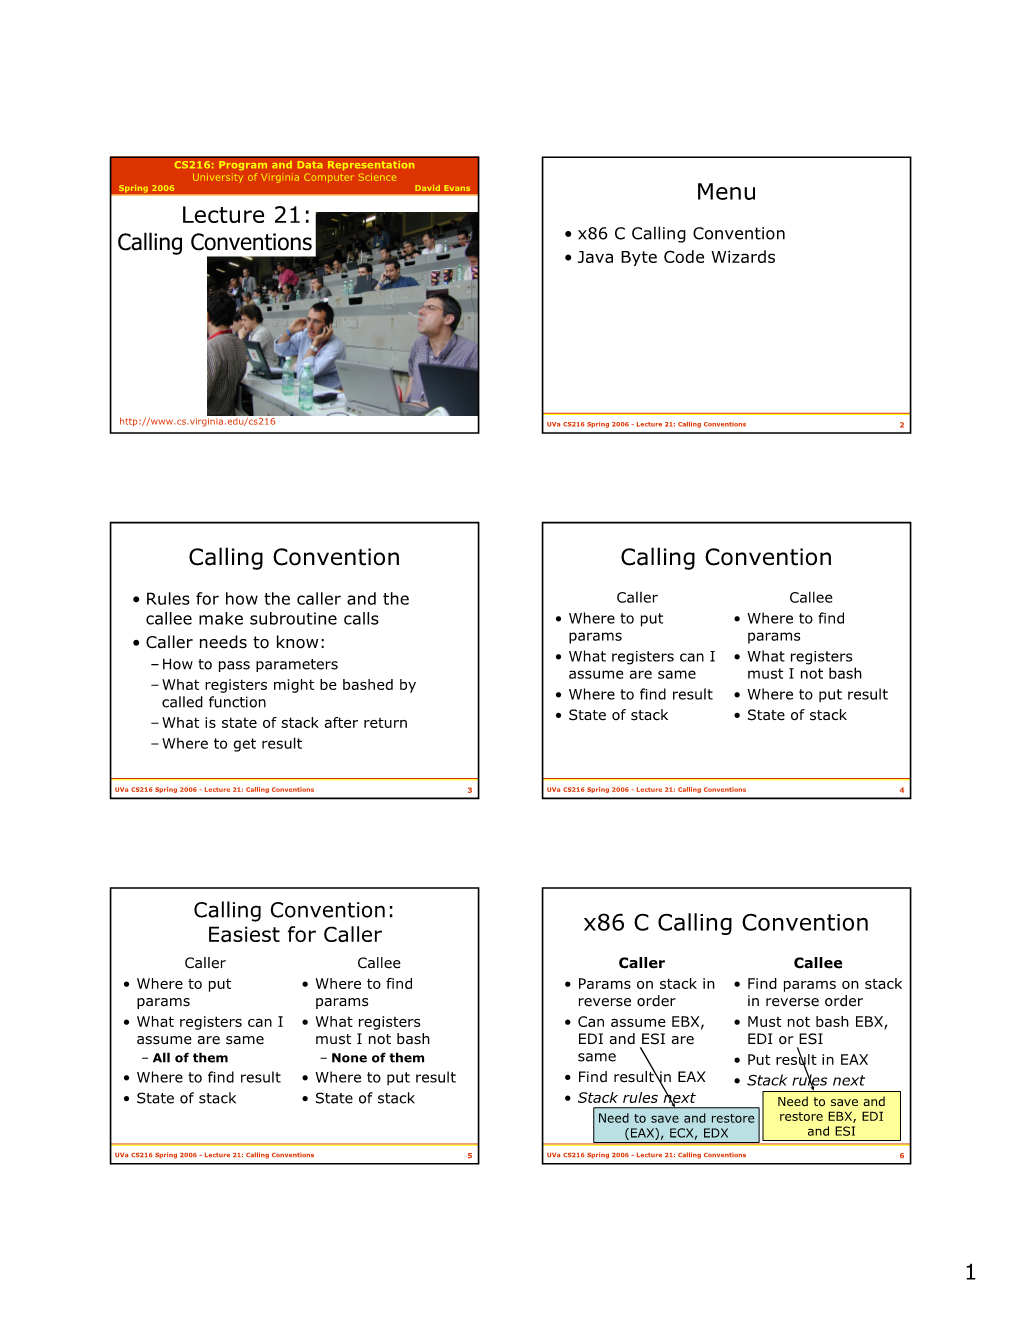 Lecture 21: Calling Conventions Menu Calling Convention Calling Convention X86 C Calling Convention